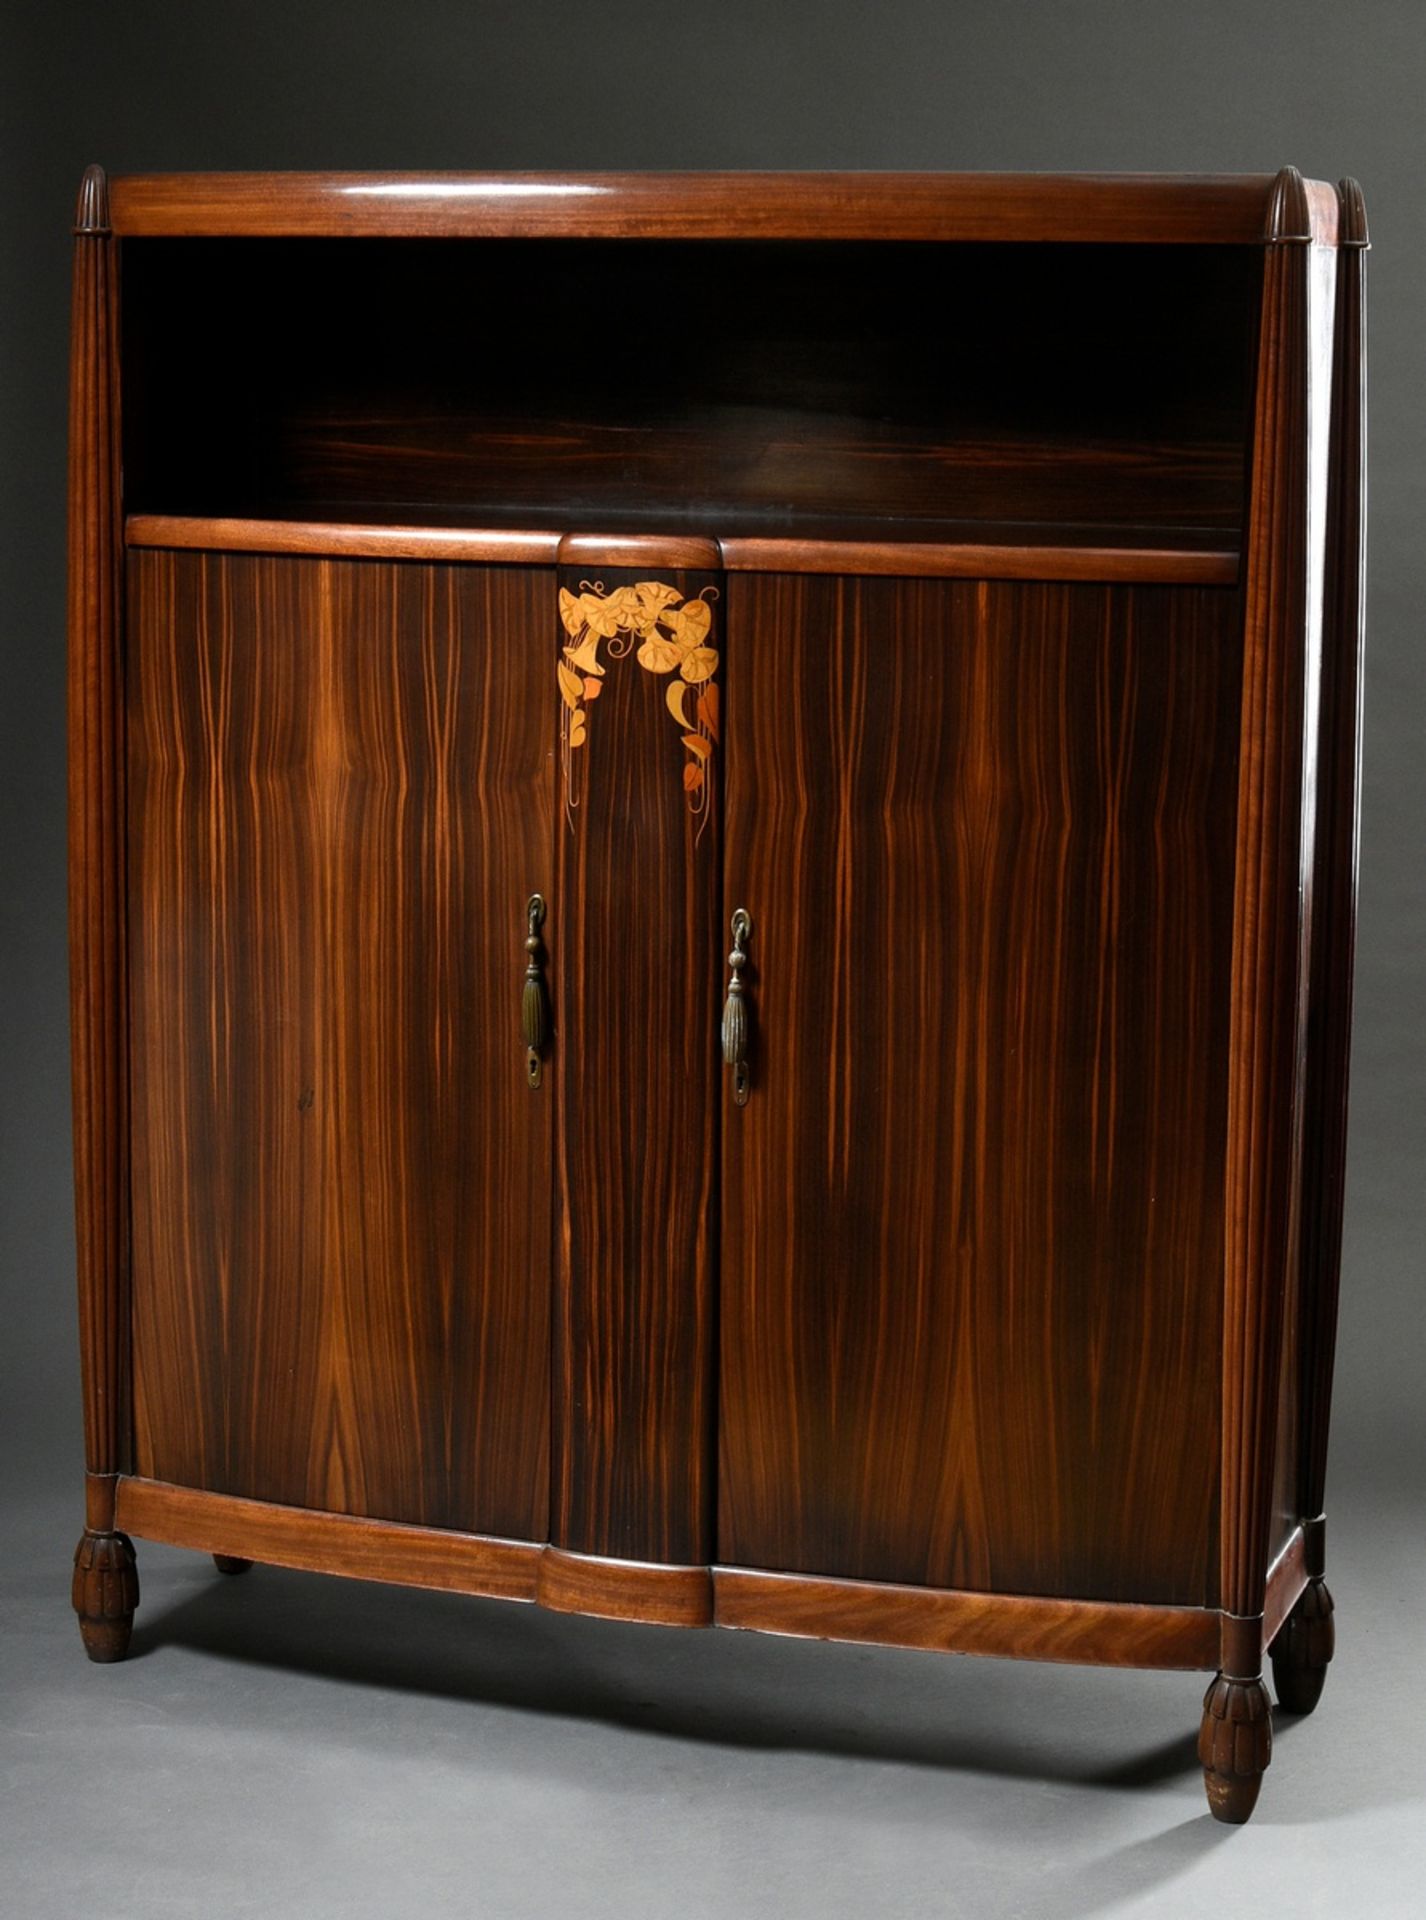 Art Deco cabinet in the style of Emile-Jacques Ruhlmann (1879-1933) with sparse inlay "winches" and